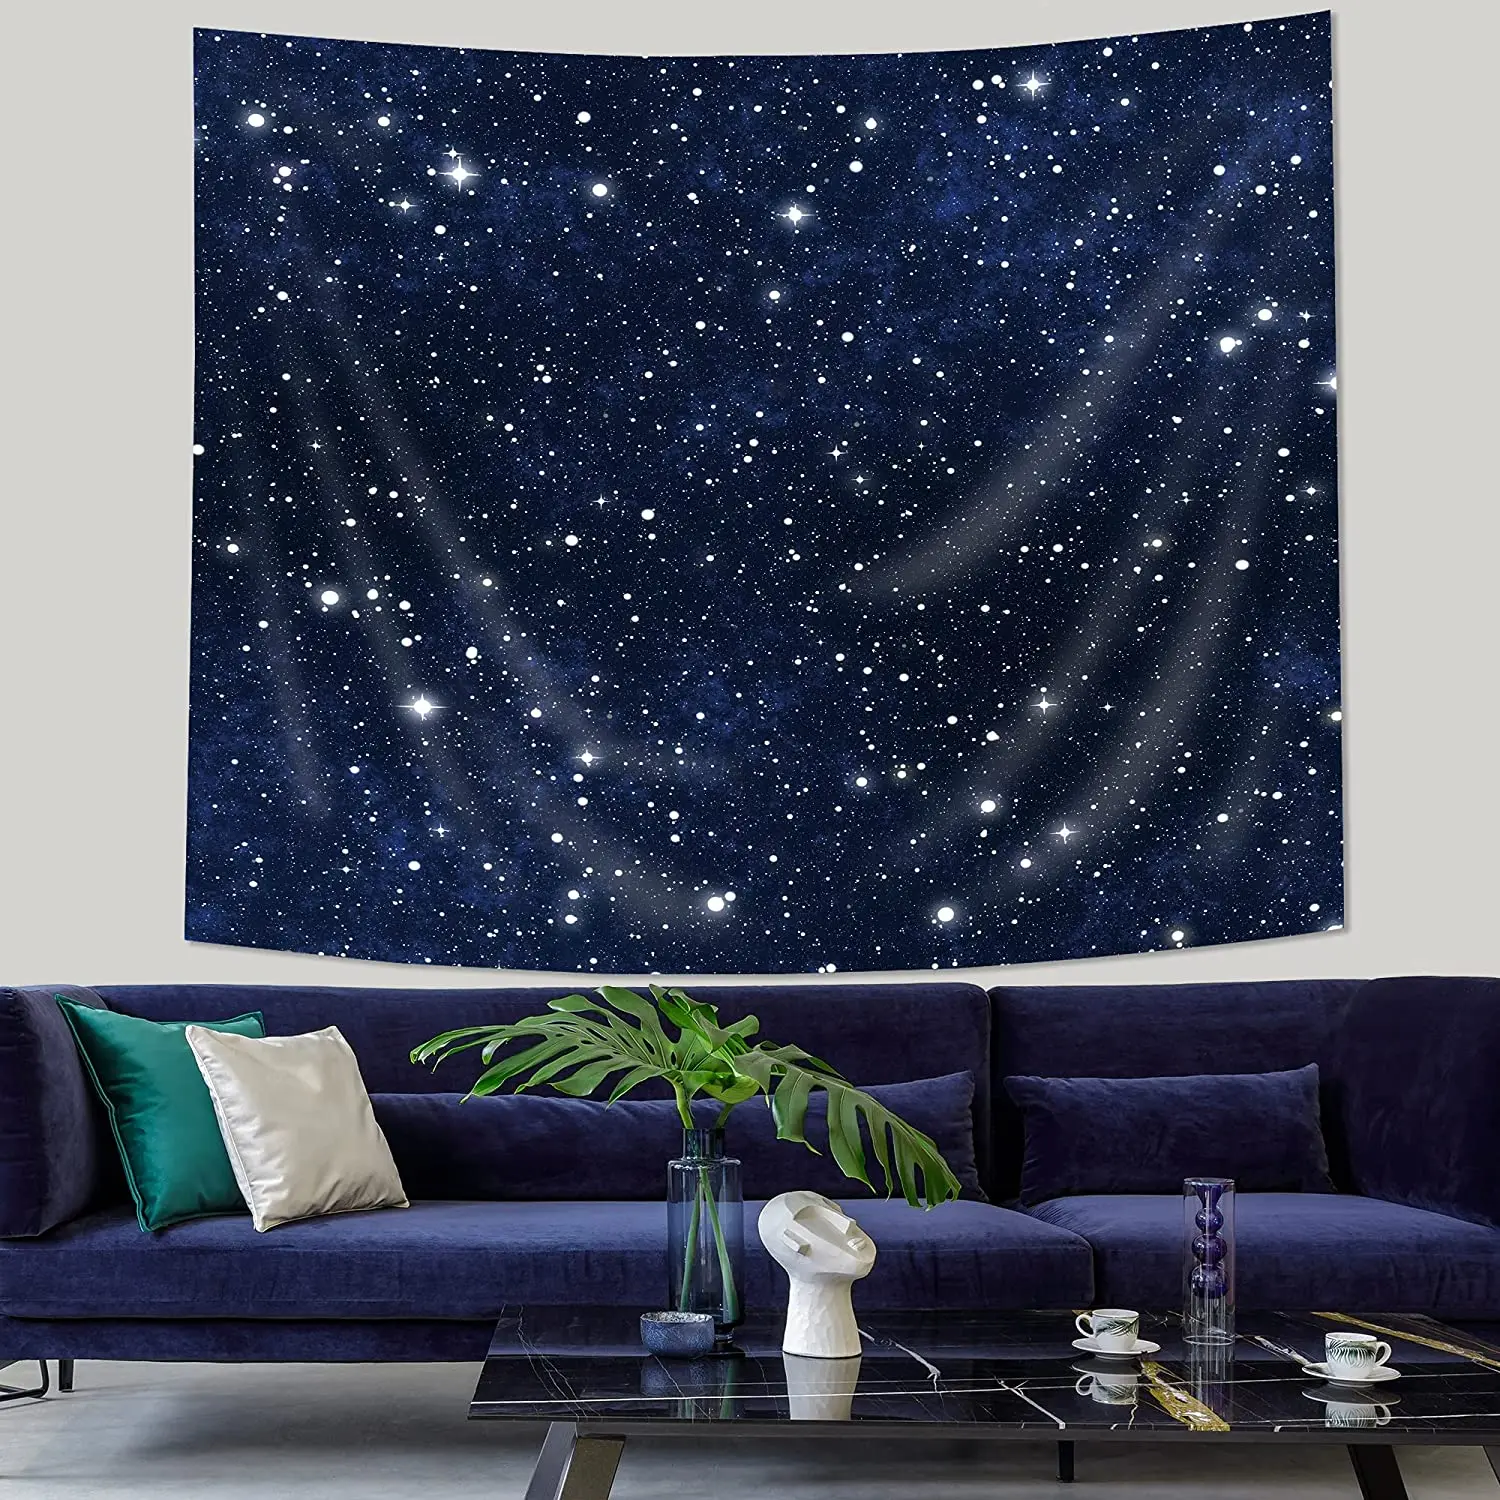 

Night Sky Stars Tapestry Wall Hanging Dark Blue Cosmic Starry 59Wx51H Inch Fantasy Galaxy Universe Texture Artwork for Bedroom